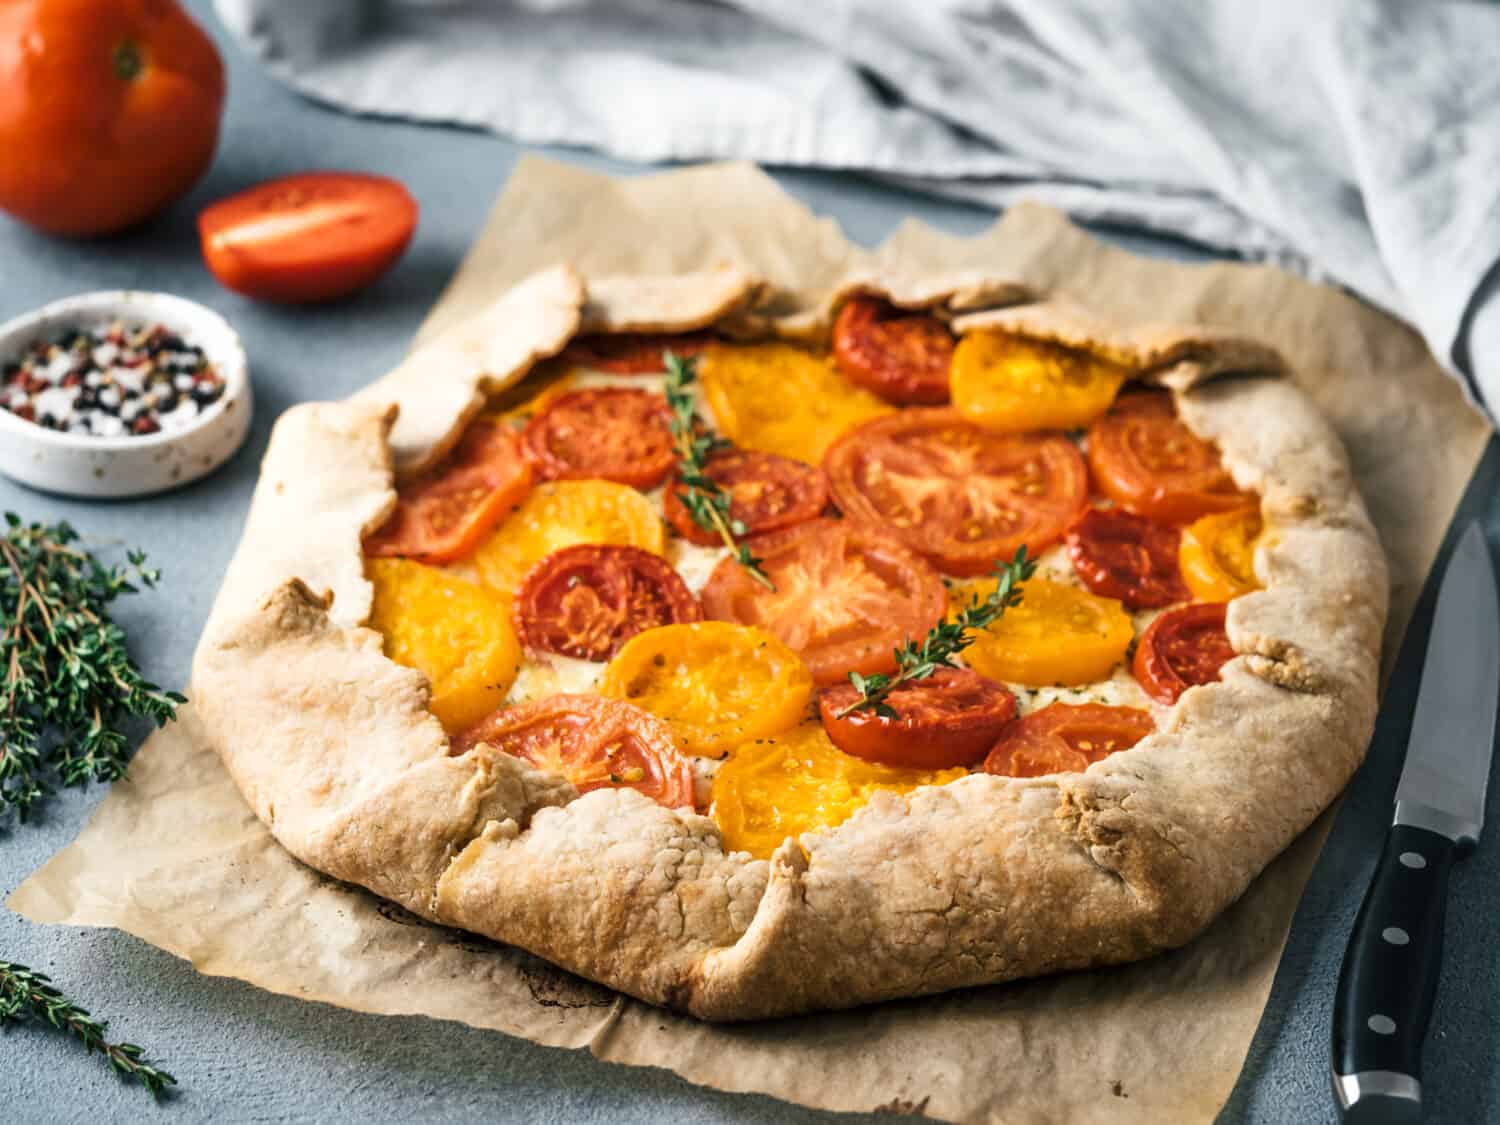 Savory fresh homemade tomato tart or galette.Ideas and recipes for healthy lunch,appetiezer- whole wheat or rye-wheat pie with tomatoes,parmesan cheese,mozzarella.Harvest tomatoes.